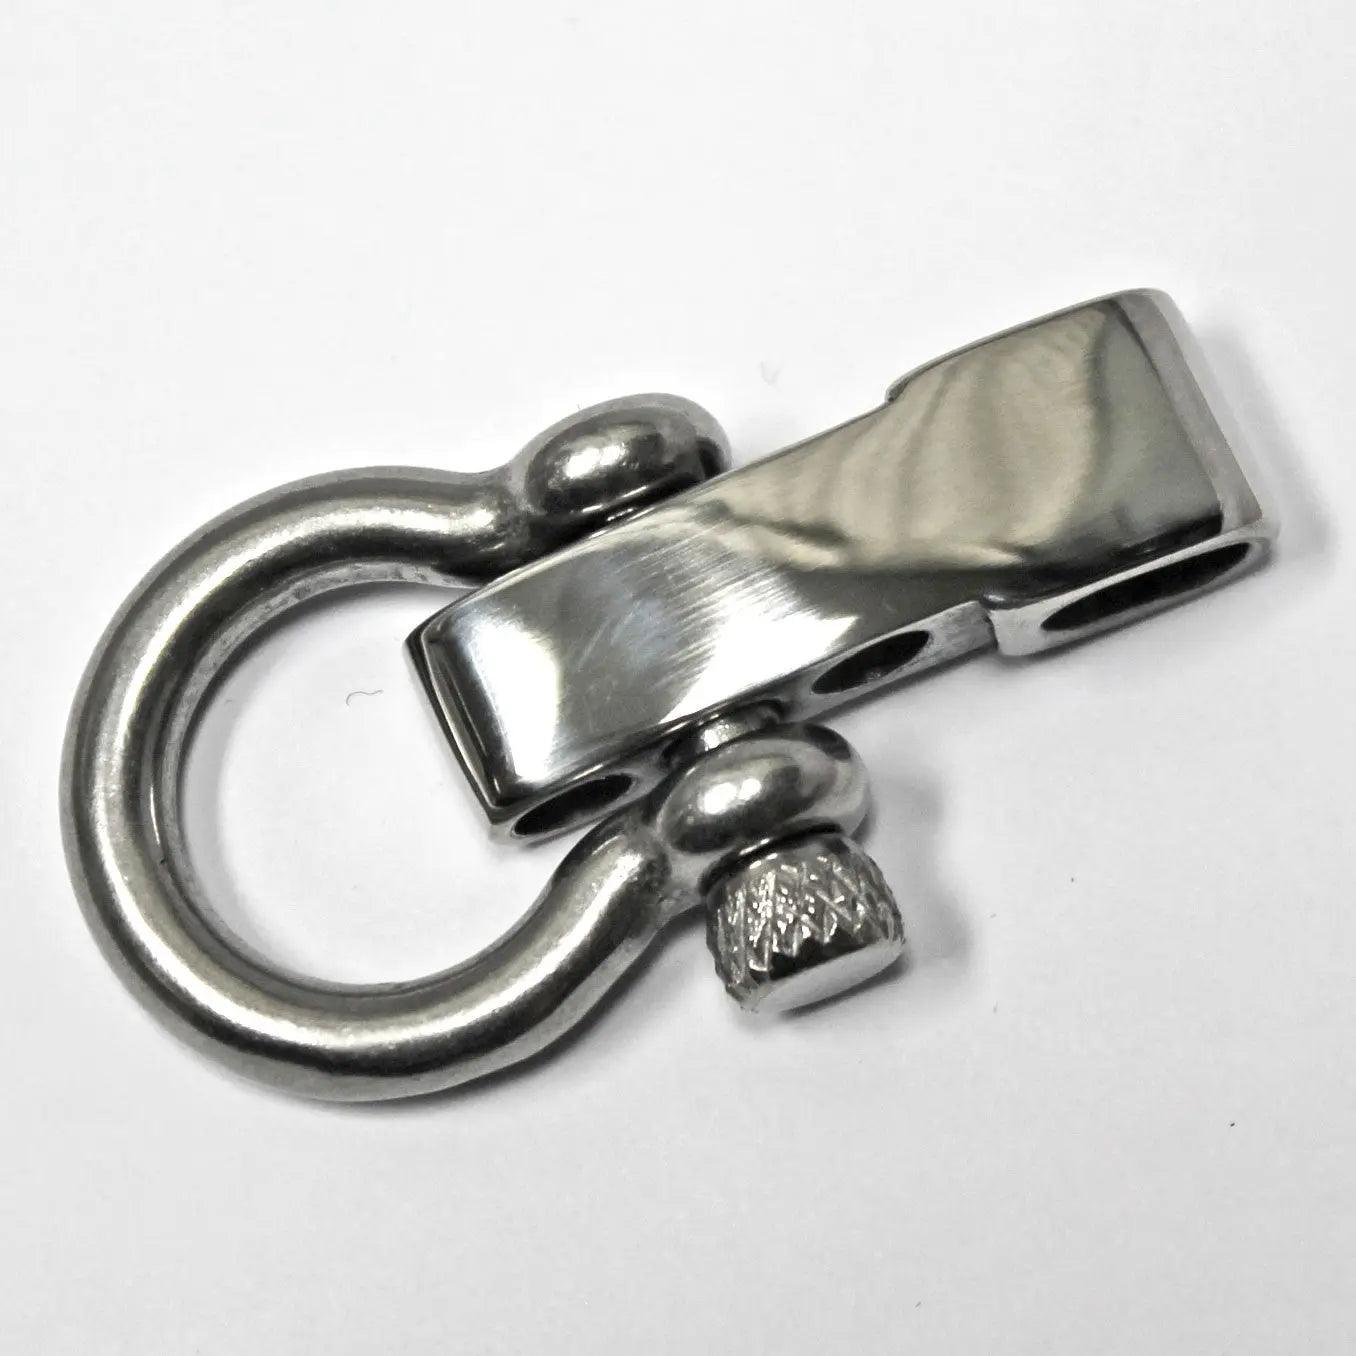 Adjustable Large Stainless Steel Bow Shackle (1 Pack)  paracordwholesale